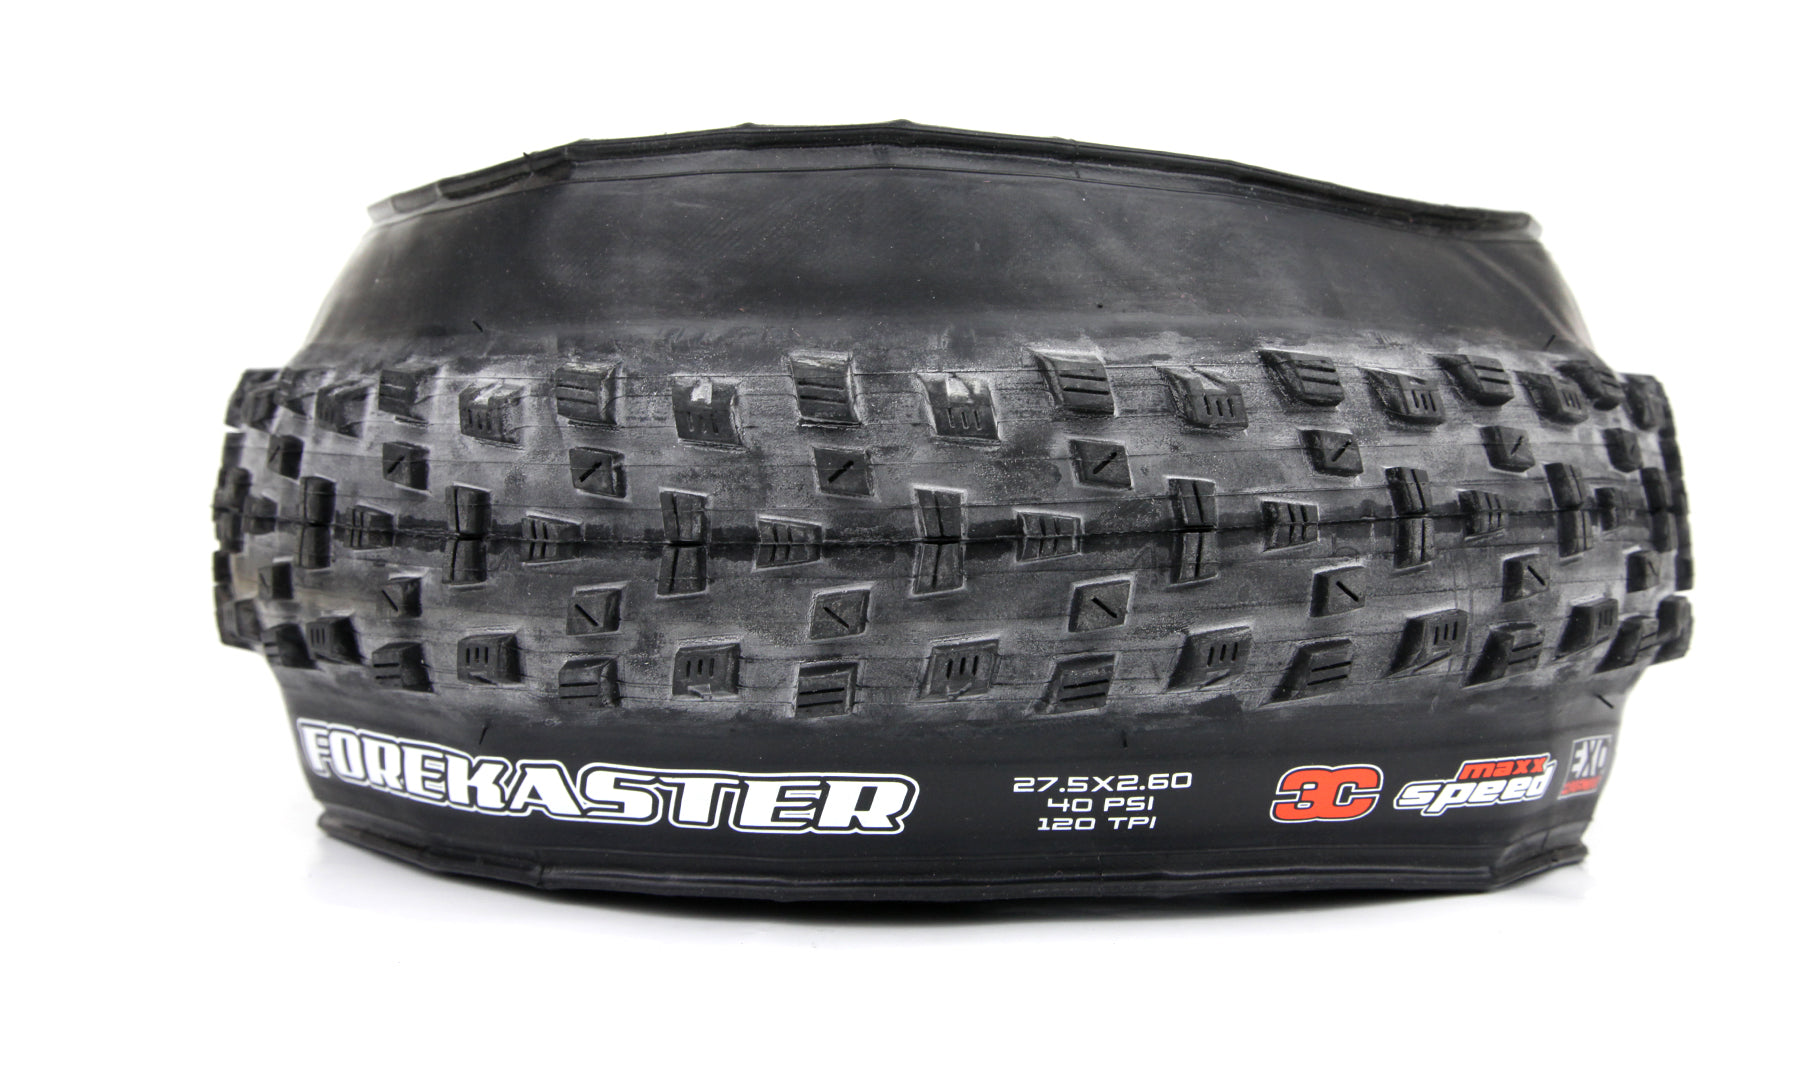 Pneu Maxxis Forekaster+ - EXO Protection - 3C Maxx Speed - Tubeless Ready assiette